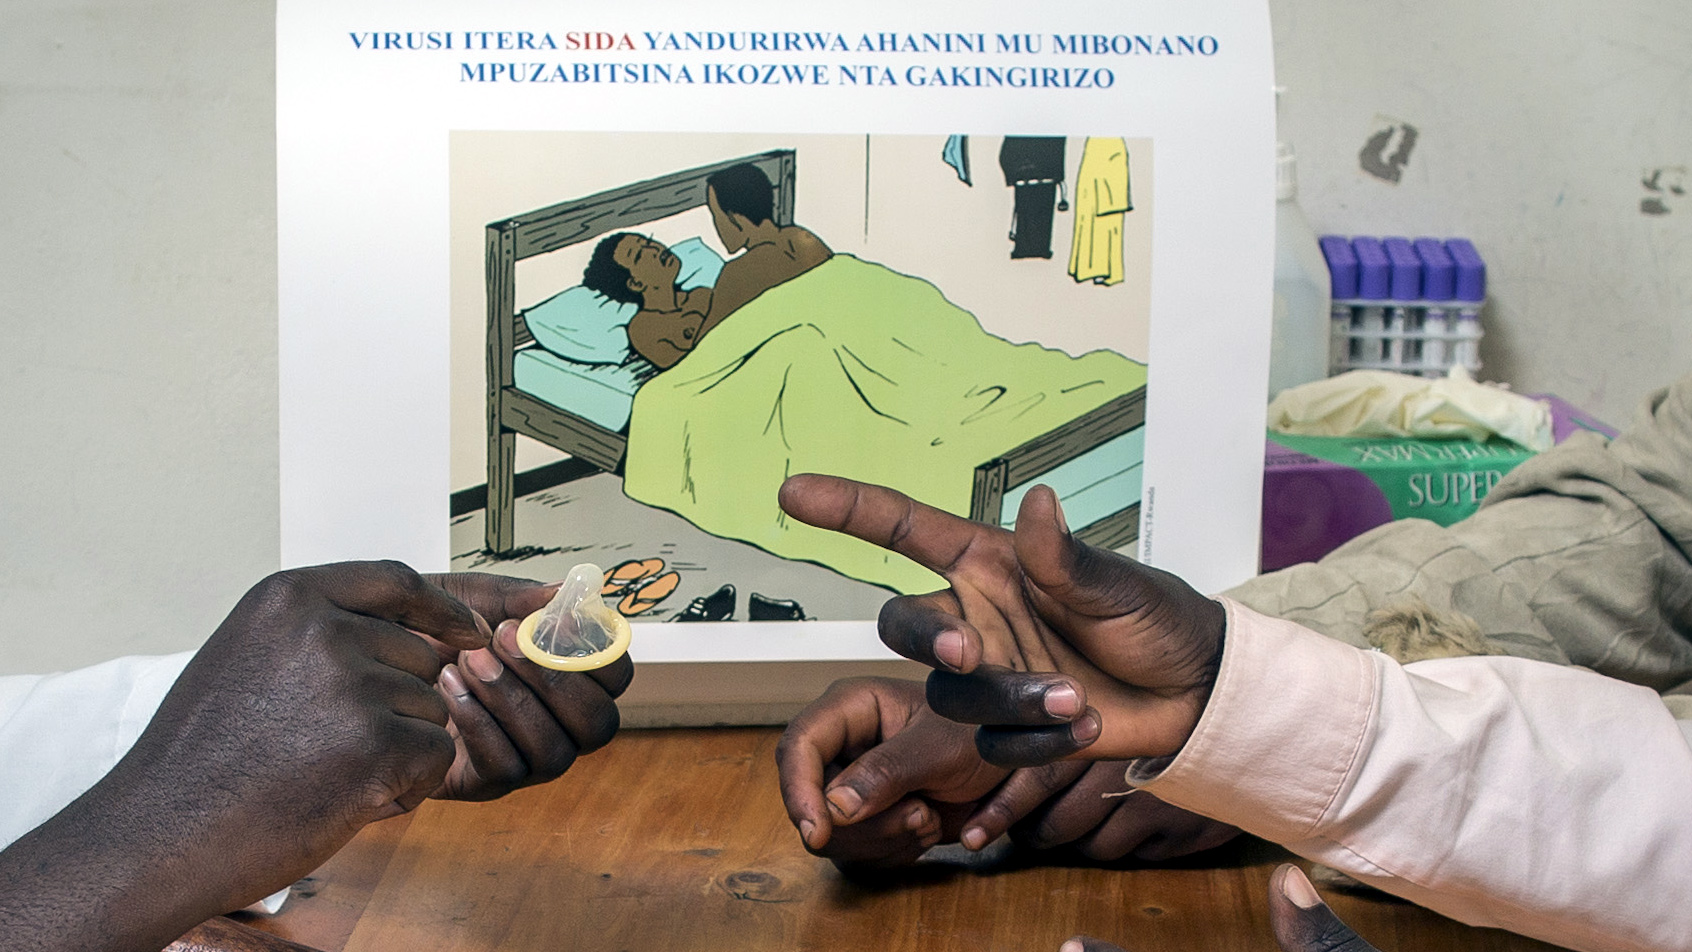 Instructions on condom use Detail photograph: arms of people sitting around a desk, with two hands on the left holding a condom and two arms and hands visible on the right